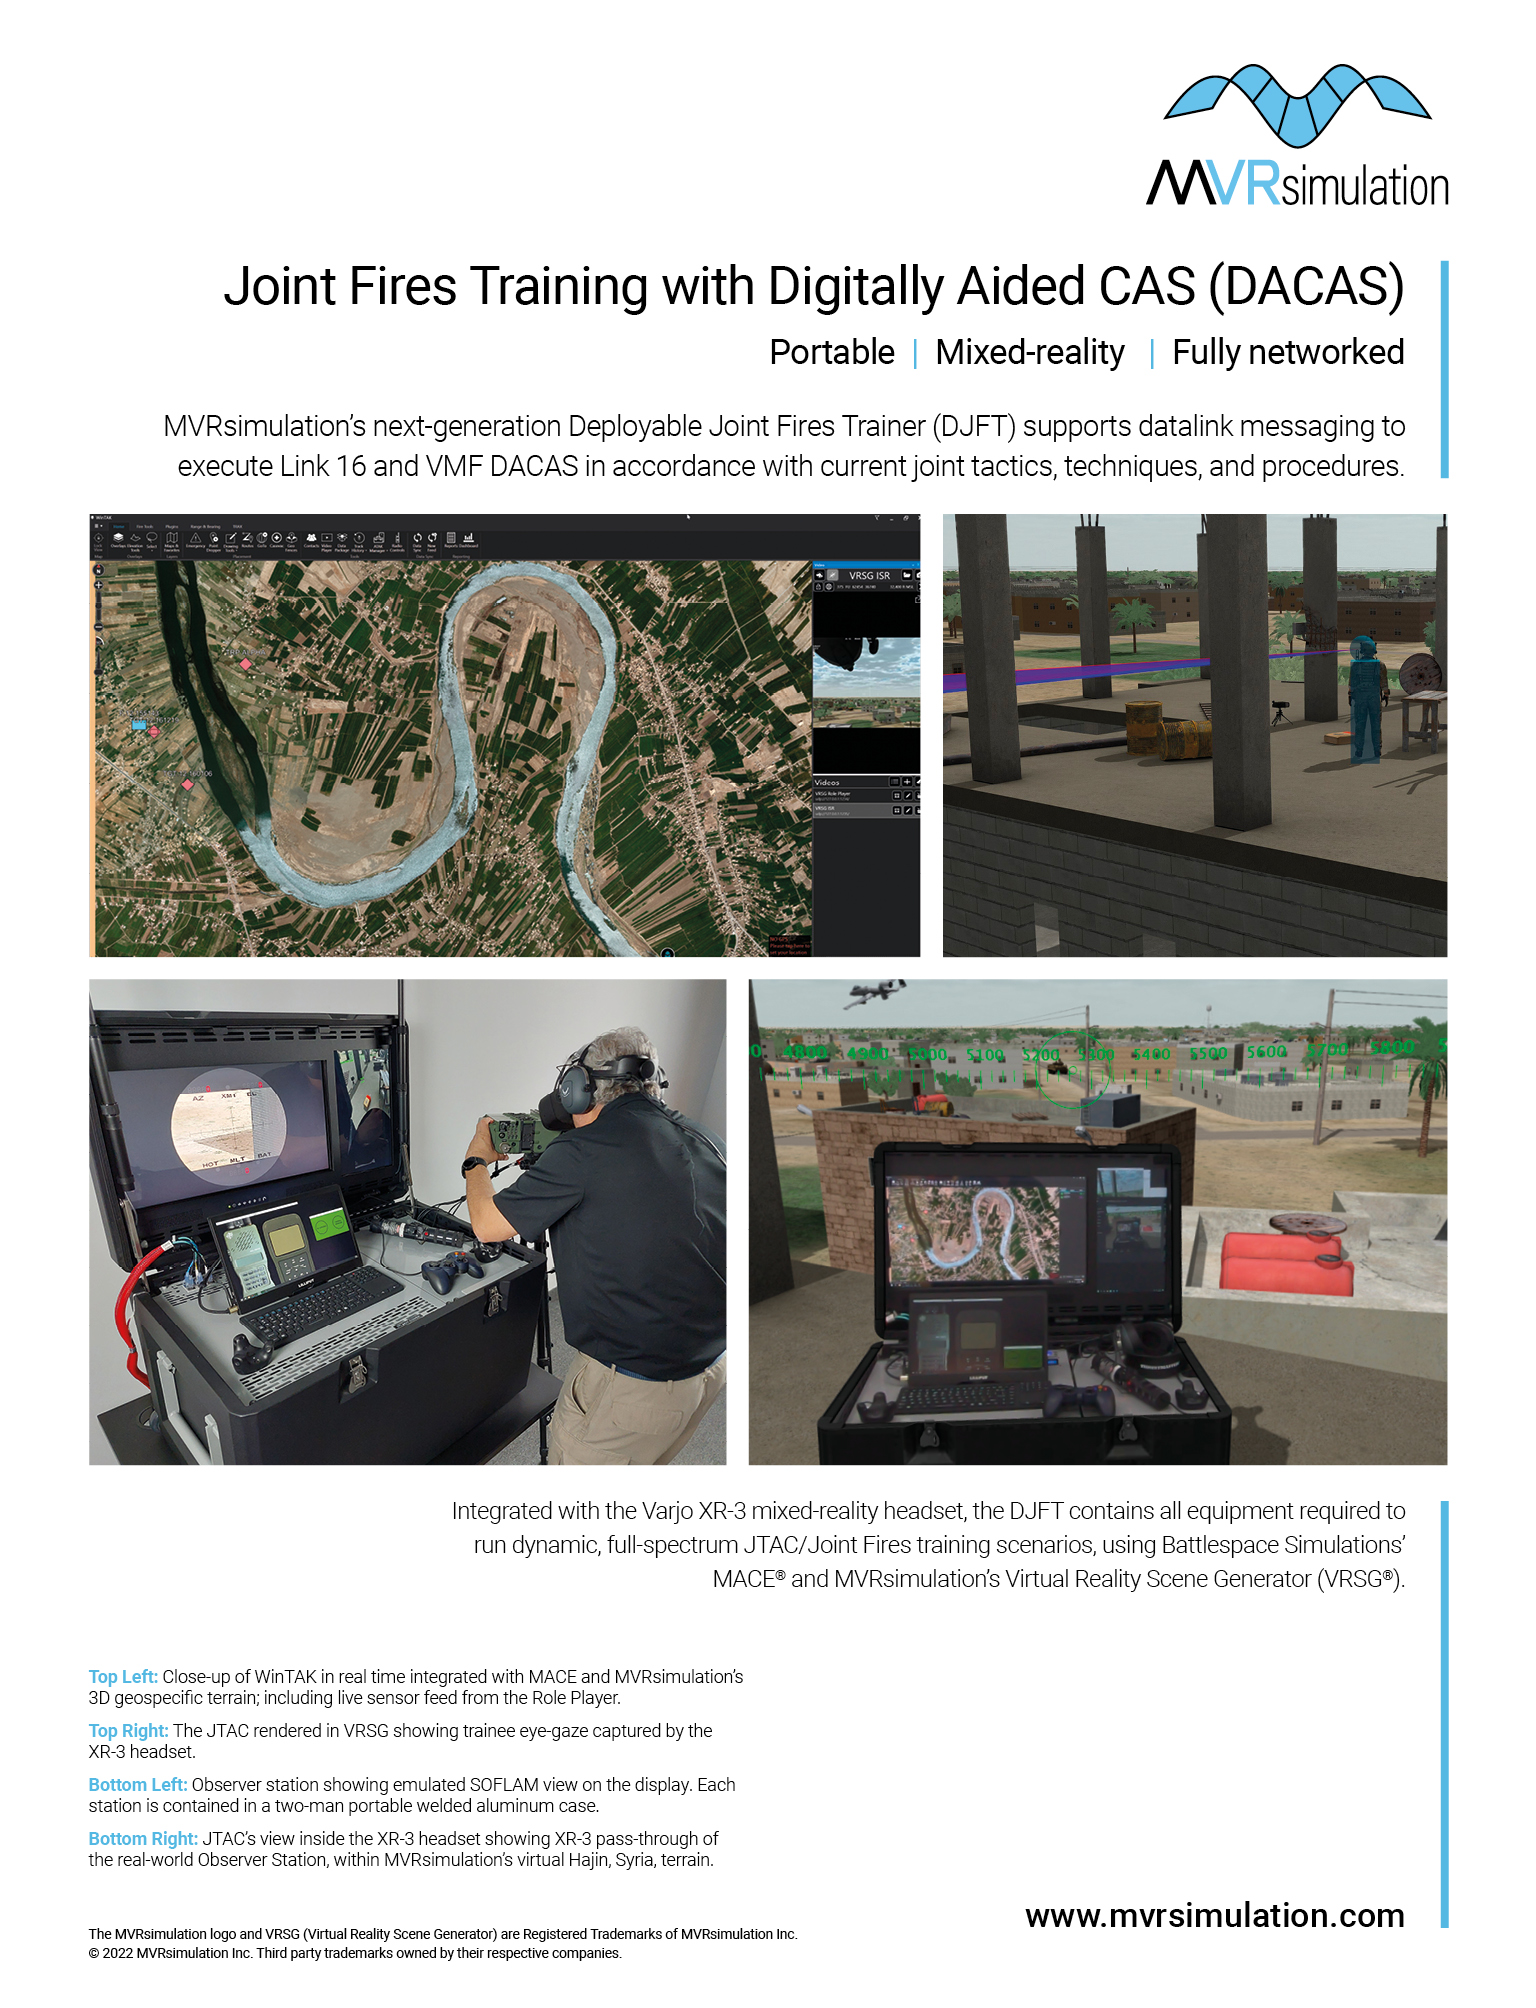 MVRsimulation advert in Military Training Issue 3, 2022